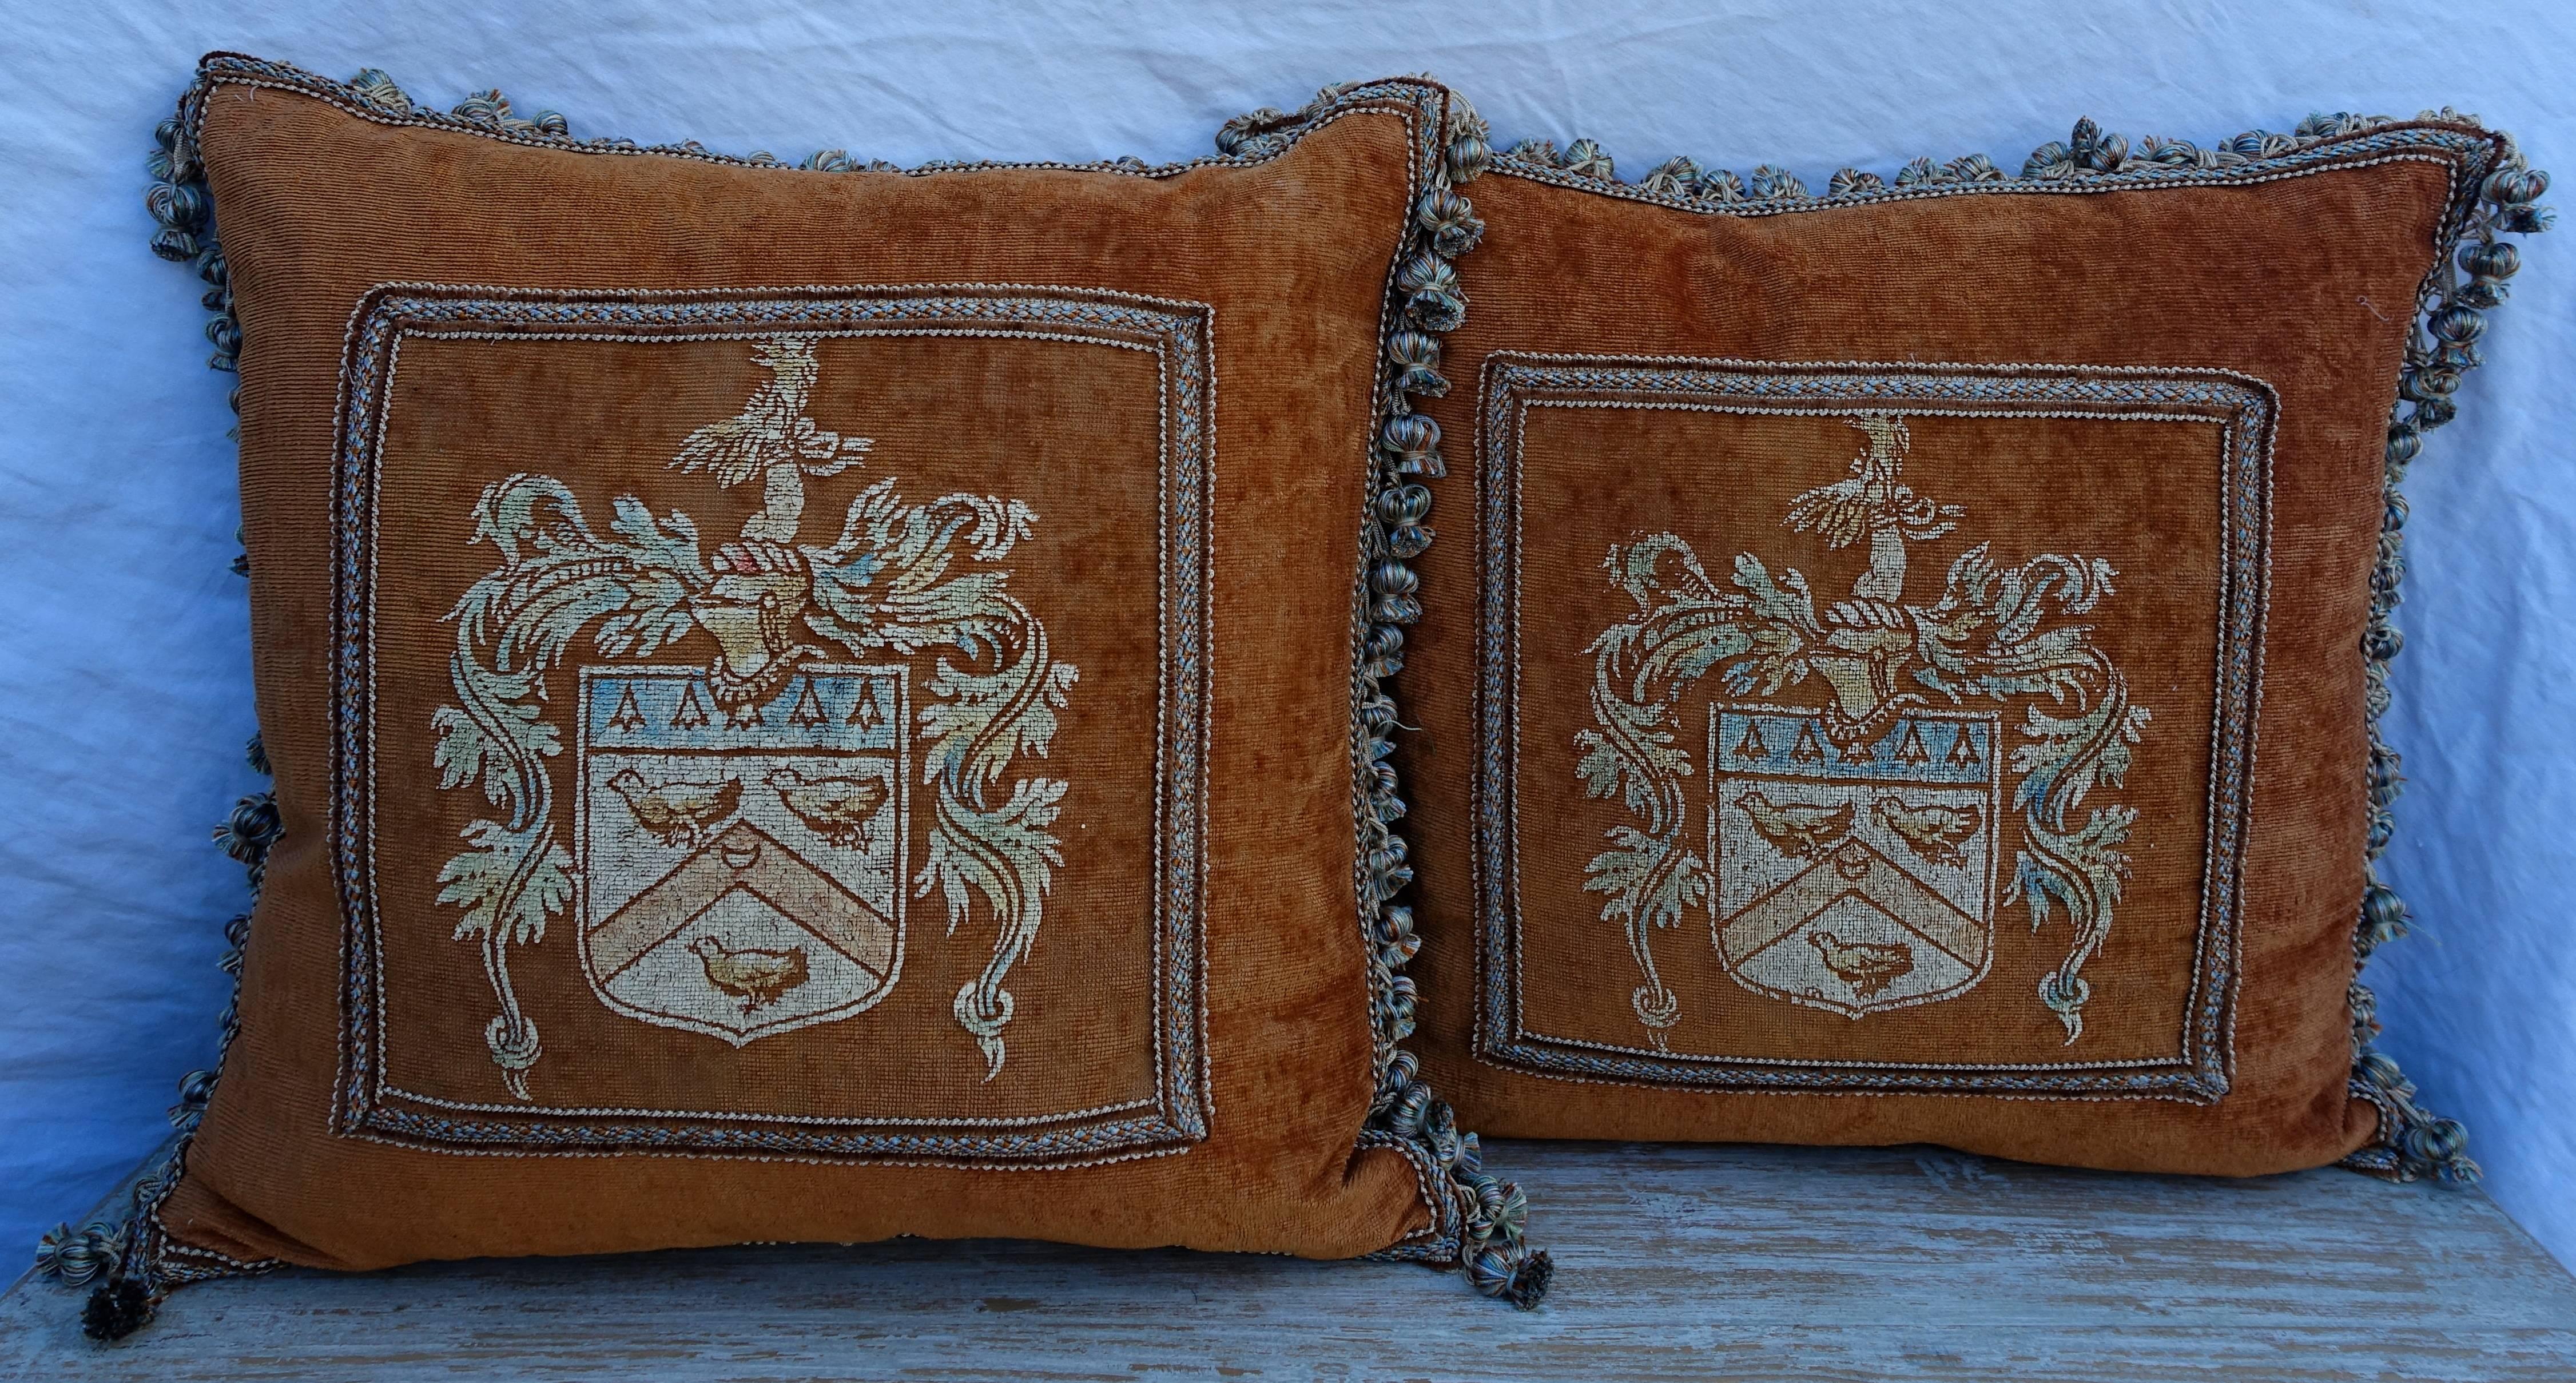 Pair of custom pillows made with 19th century painted velvet combined with silk backs and tassel trim all around. Down filled inserts, sewn shut.